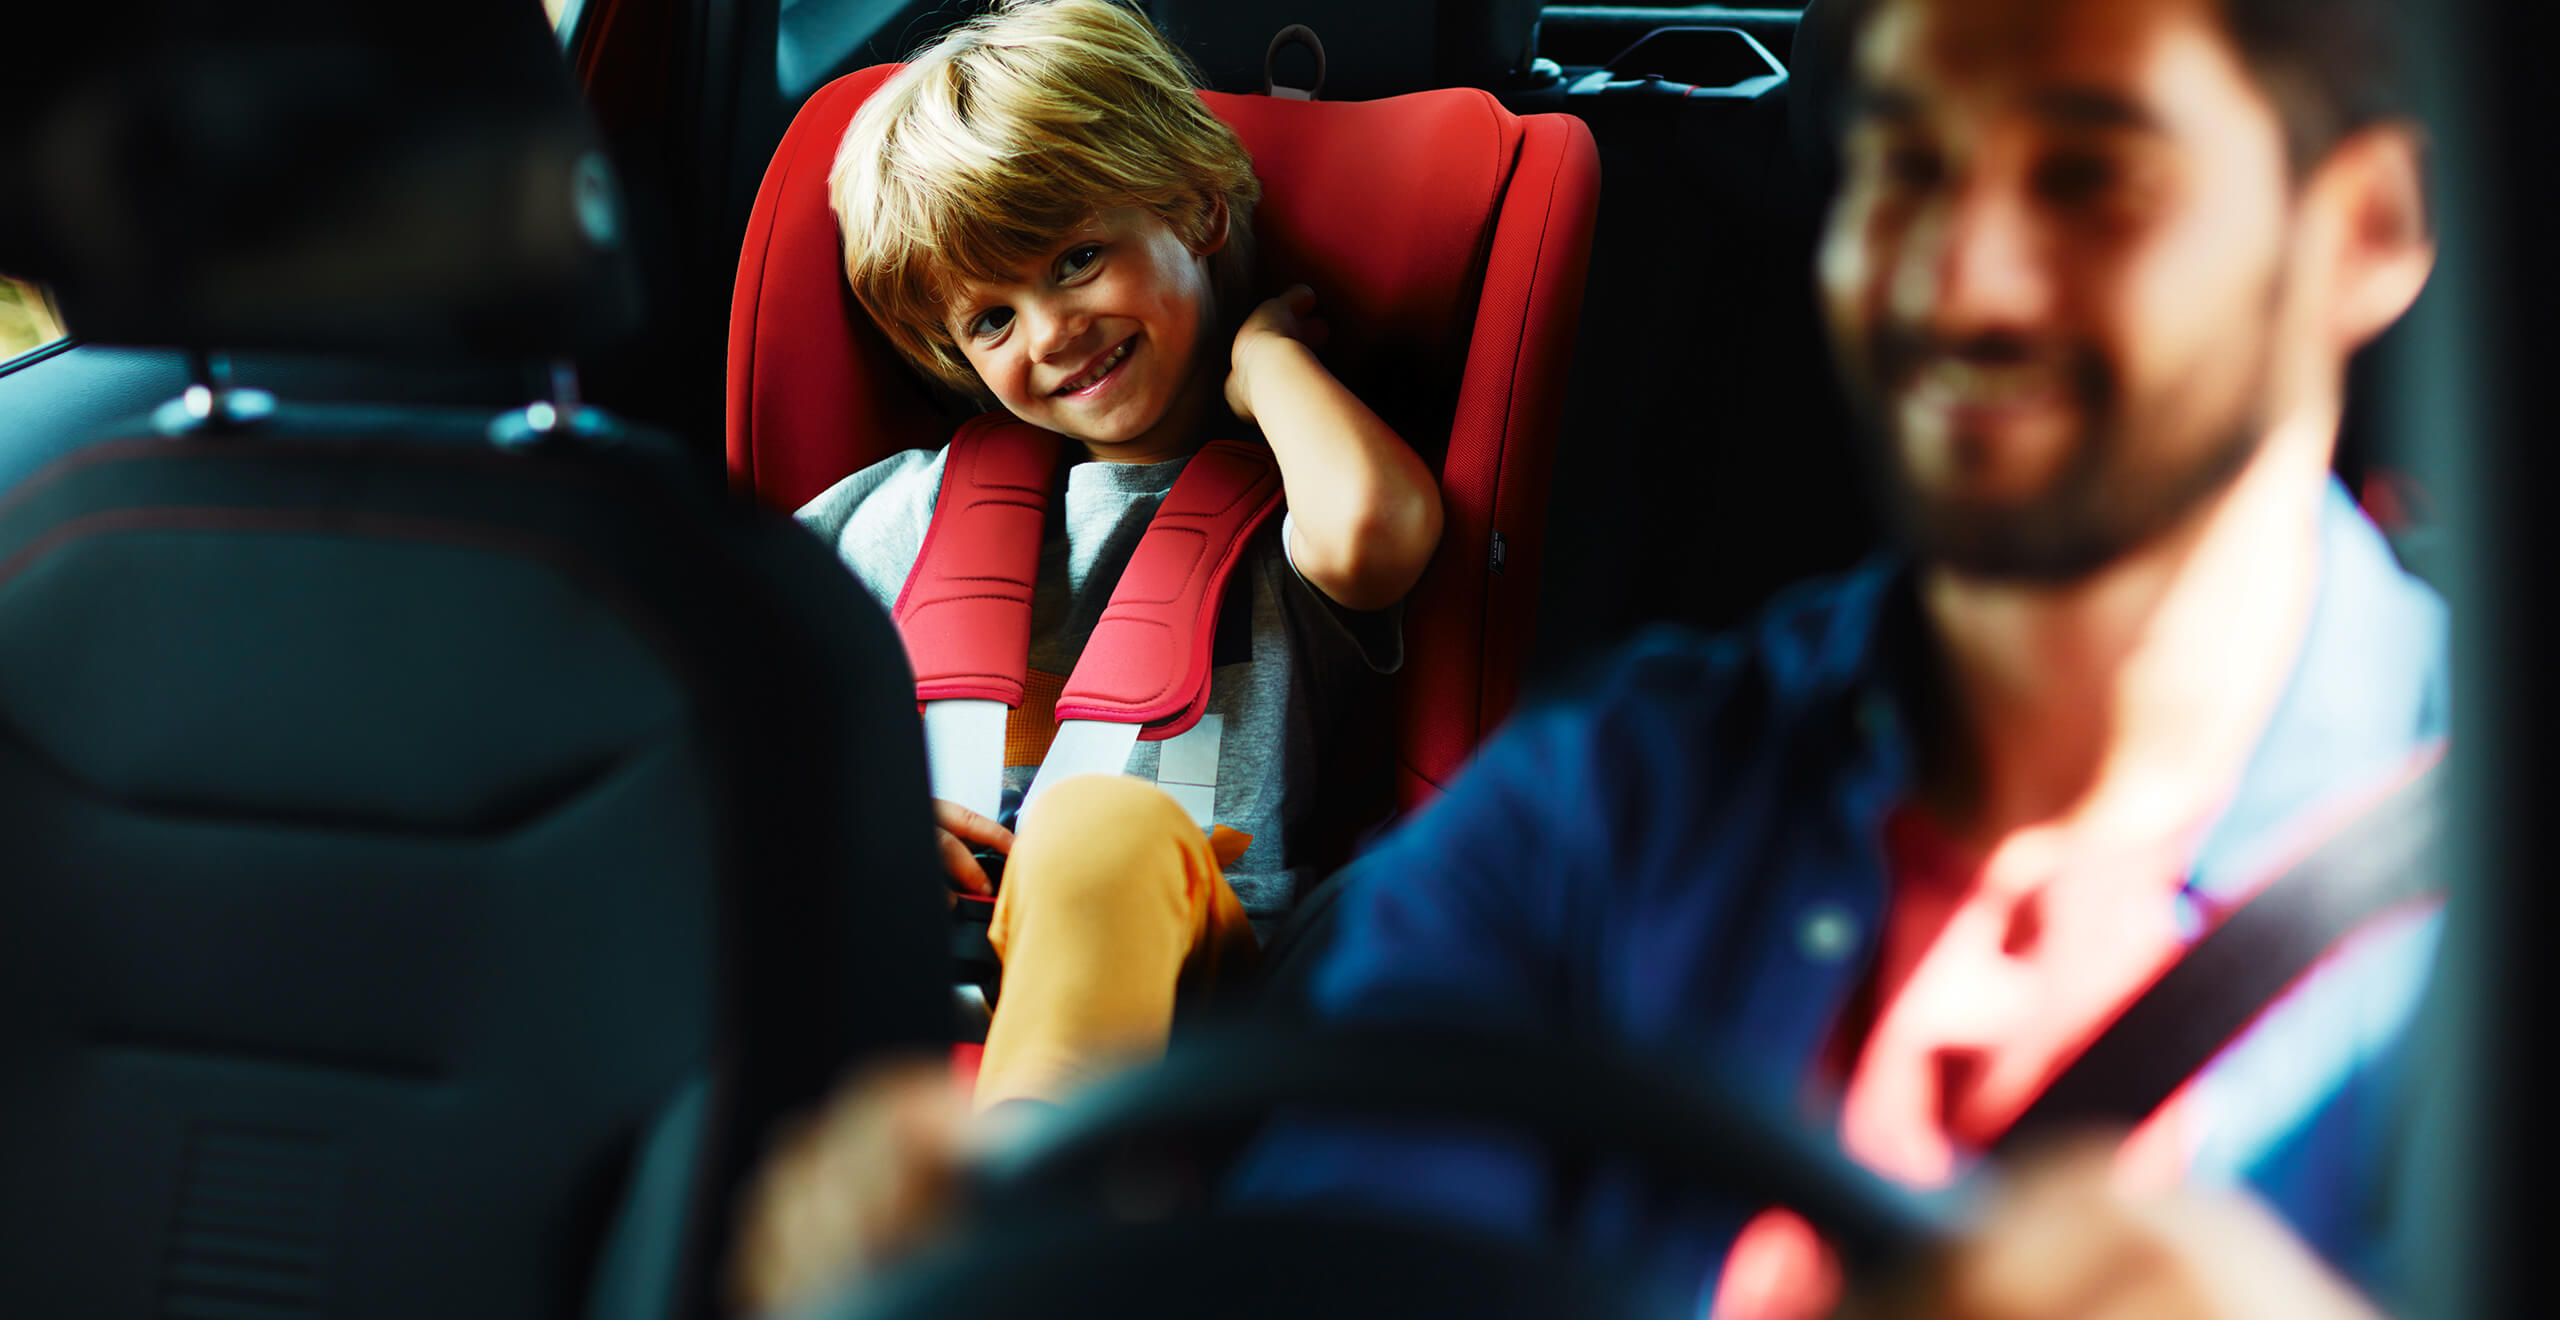 SEAT new car services warranty extension  maintenance – Child in child seat with father driving the car interior view